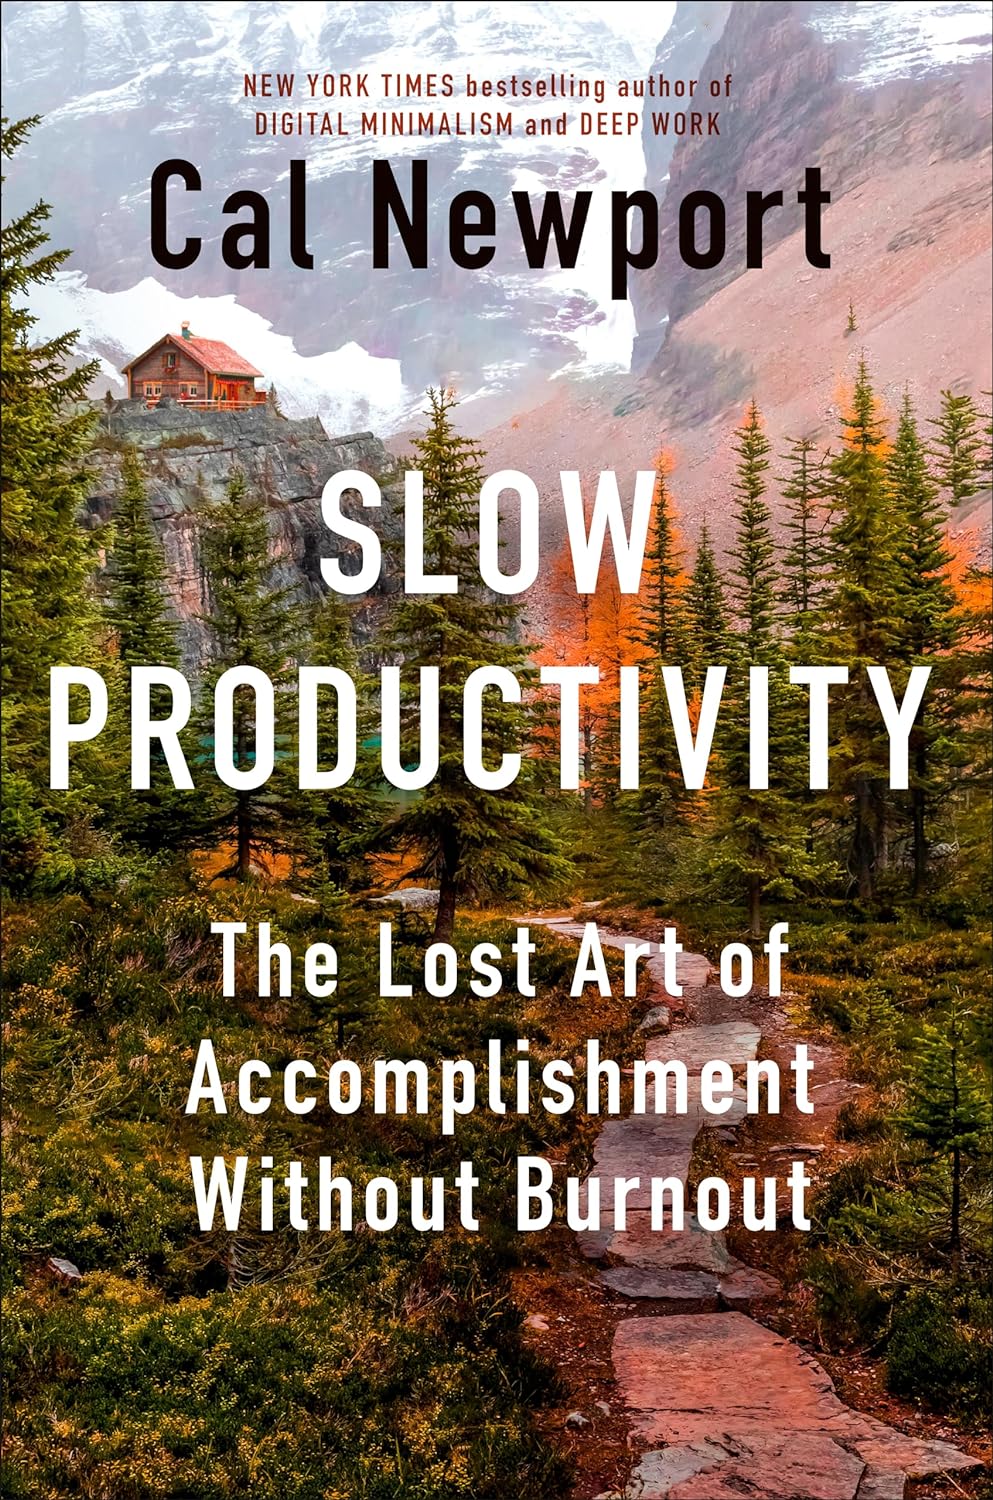 Slow Productivity: The Lost Art of Accomplishment Without Burnout [Cal Newport]